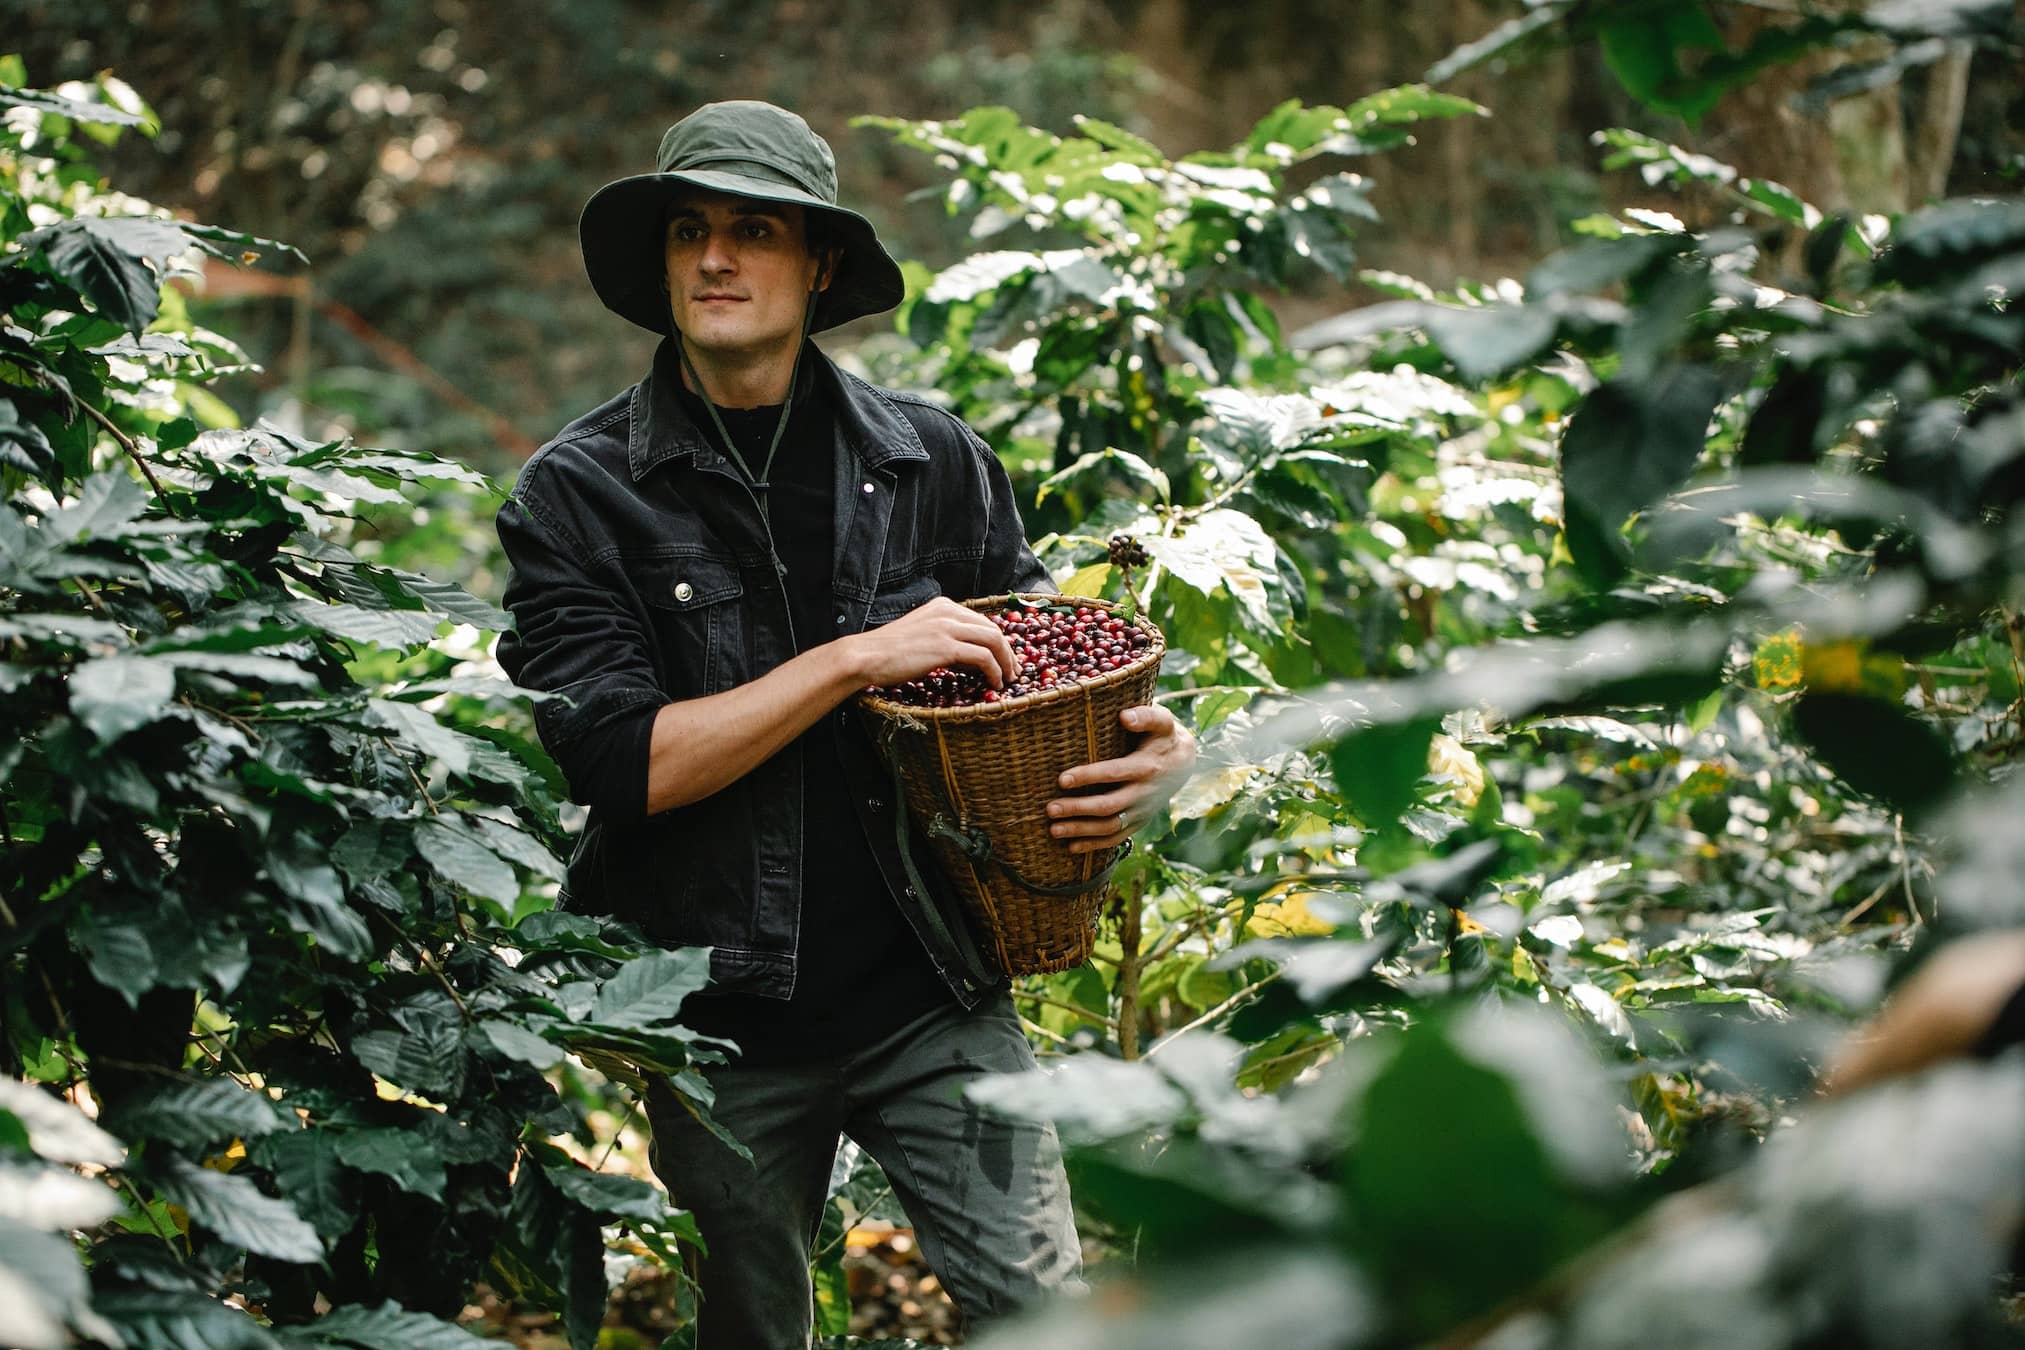 Are certifications helpful for coffee farmers?